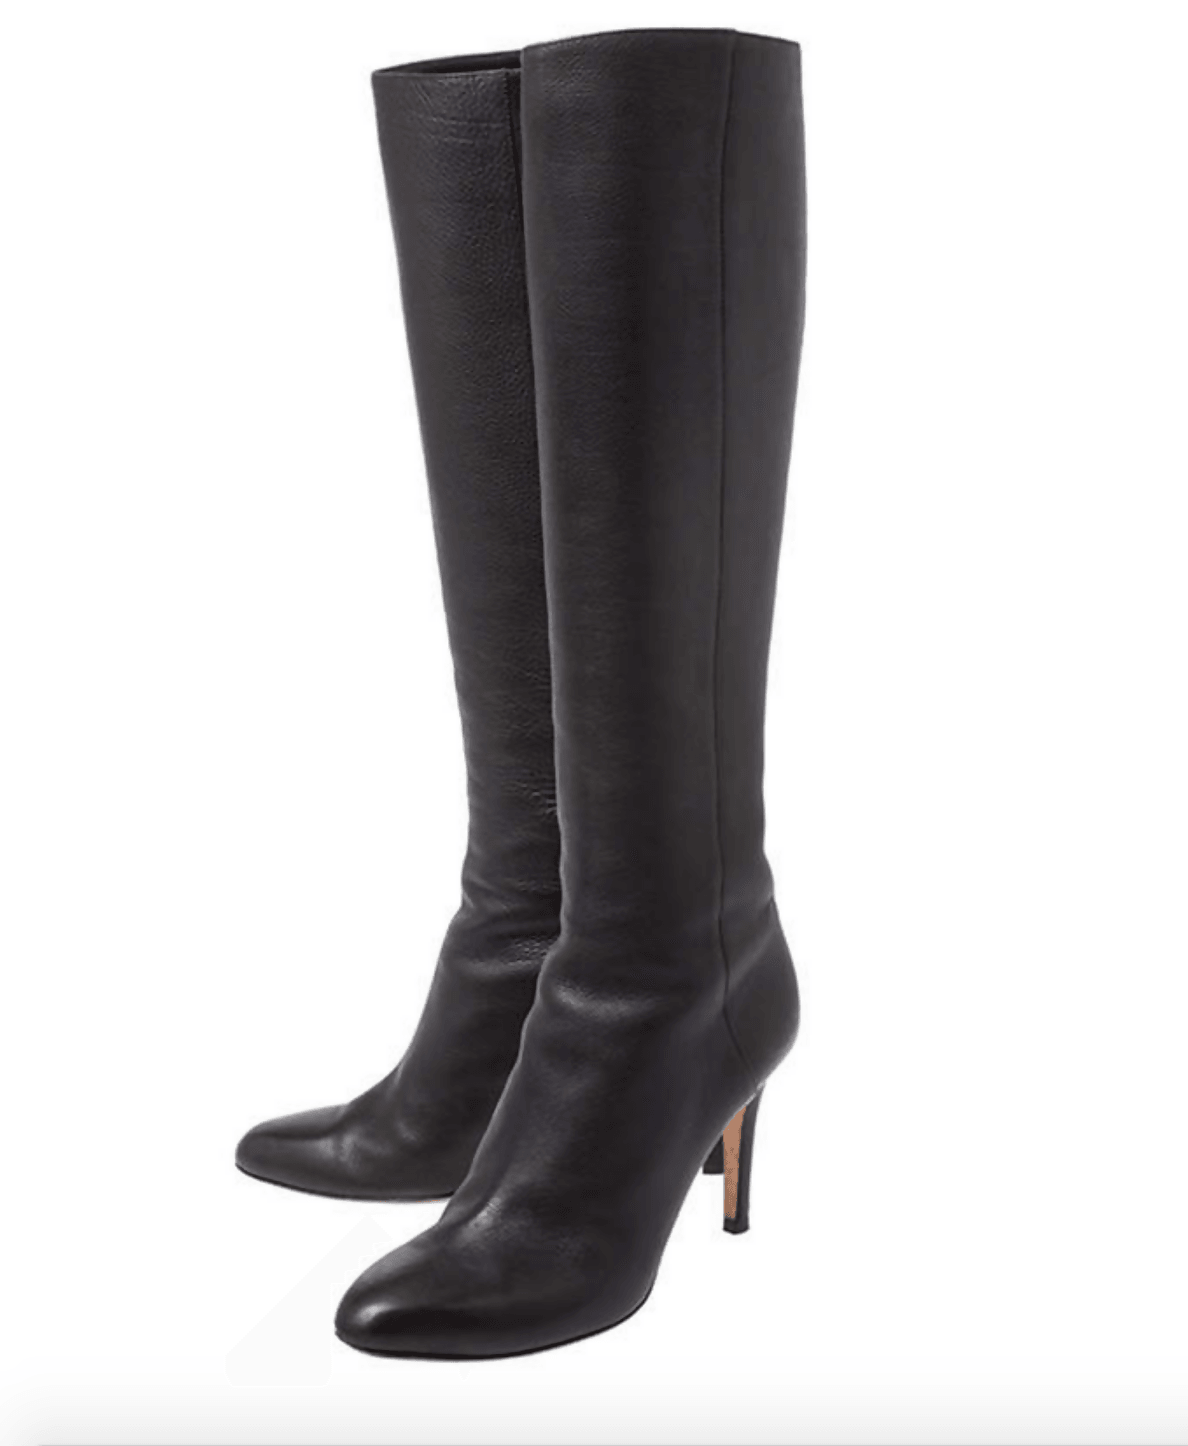 Heeled Boots in Black - Endless